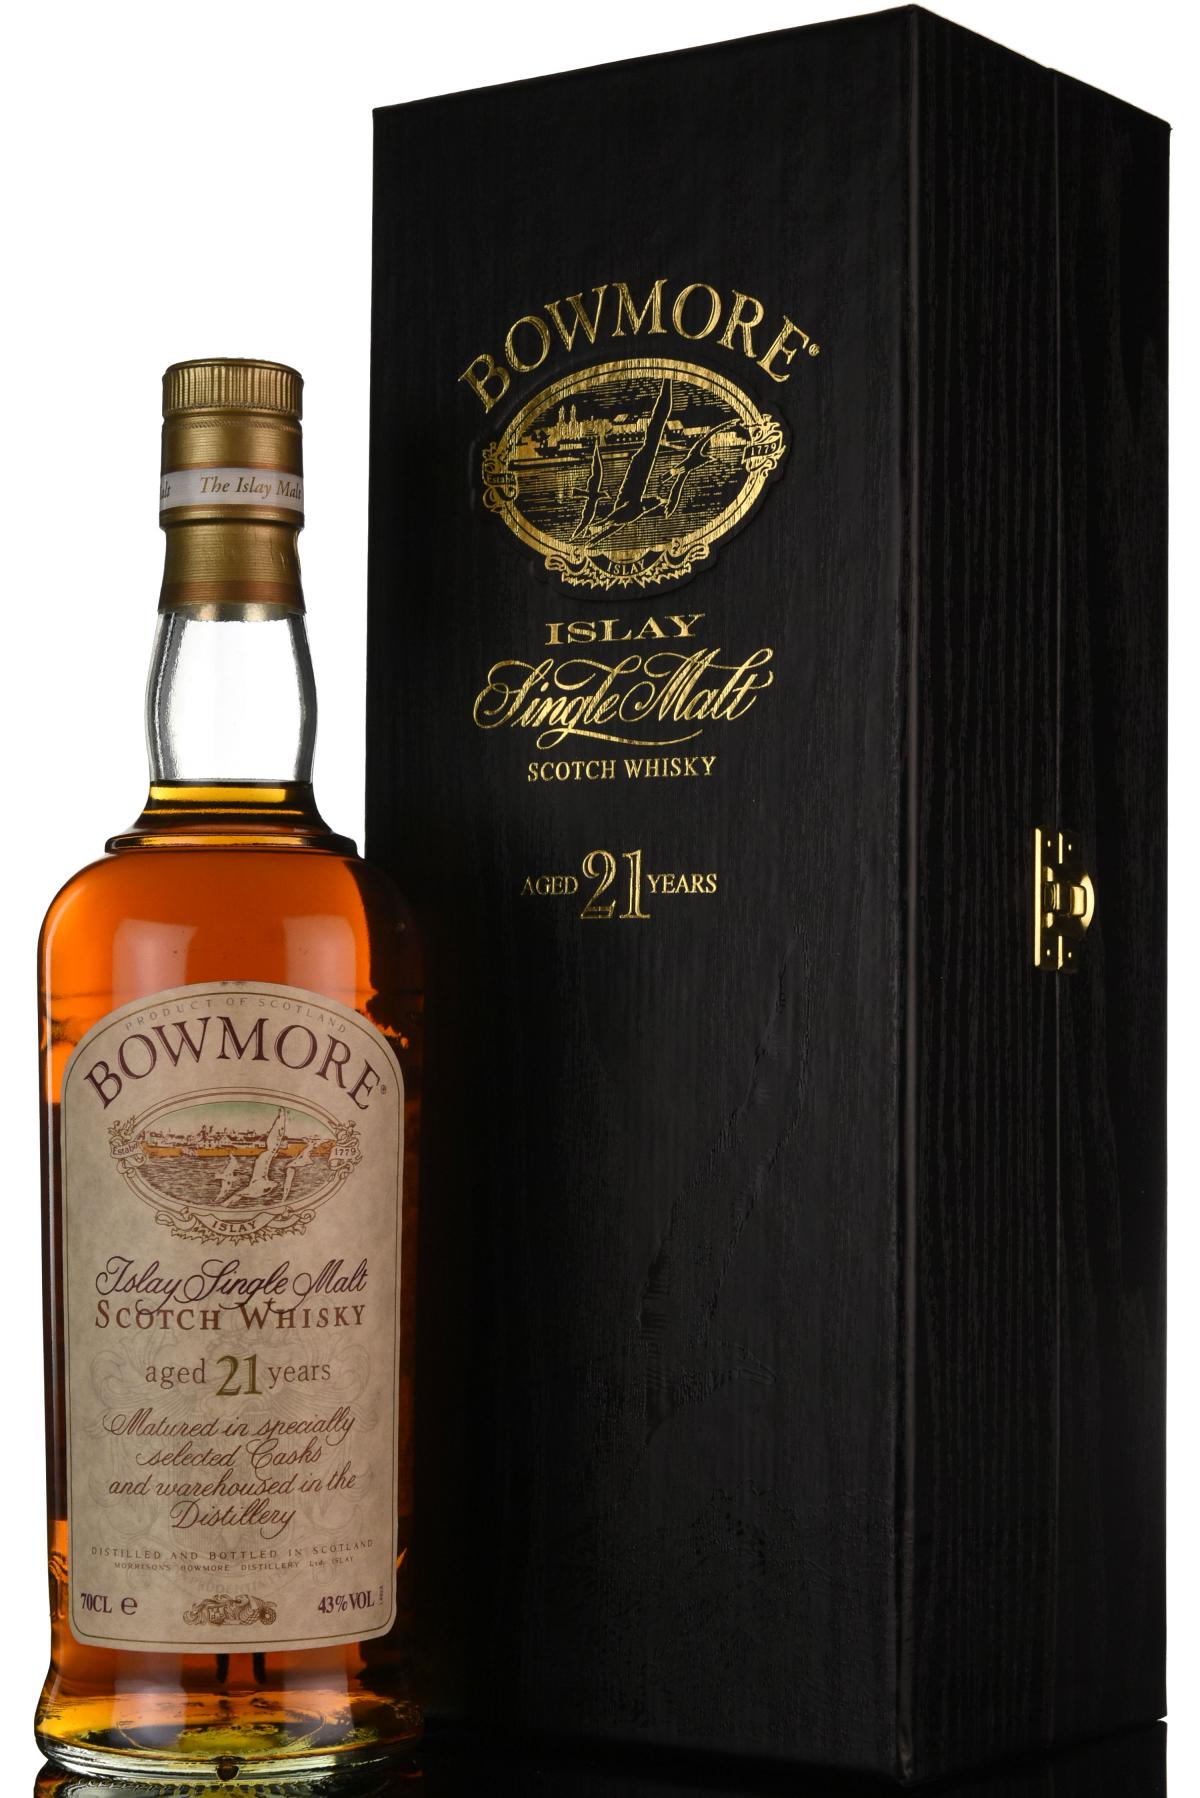 Bowmore 21 Year Old - 2000s